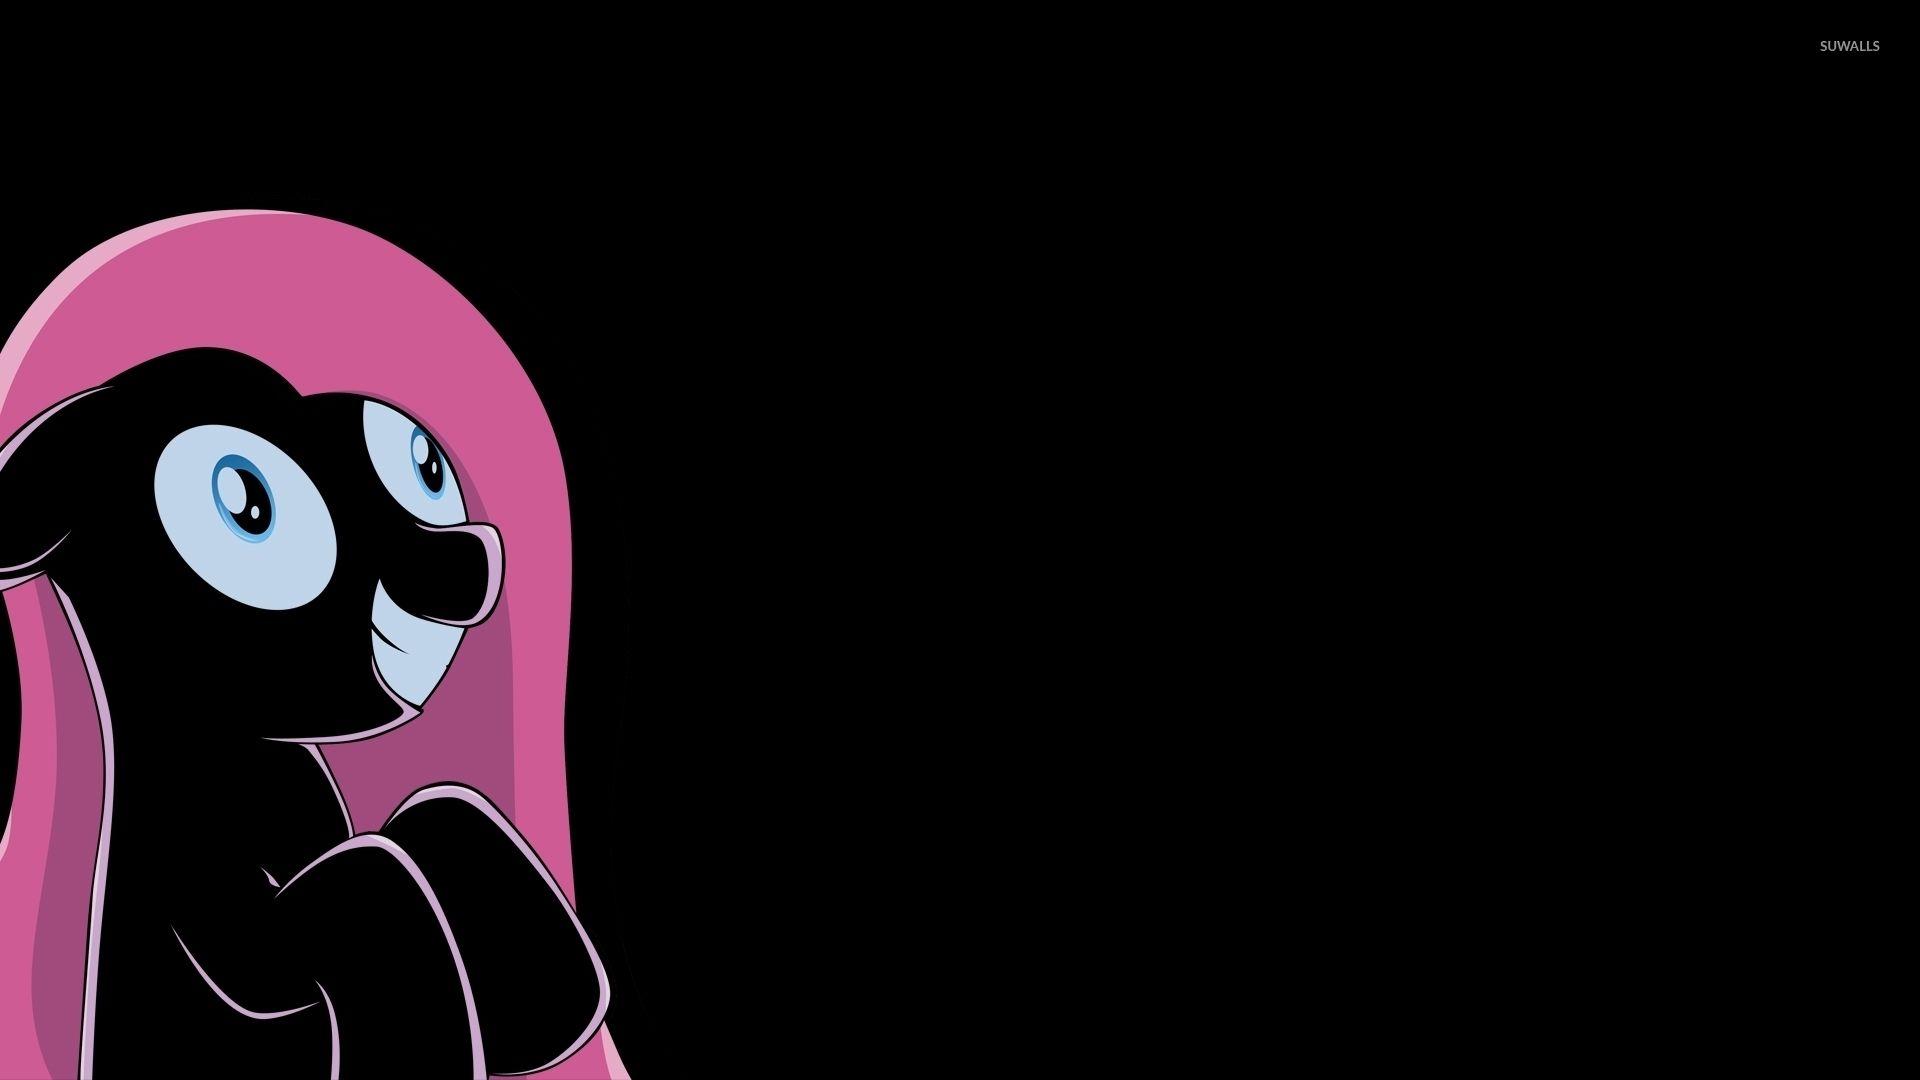 Pinkie Pie with big blue eyes Little Pony wallpaper